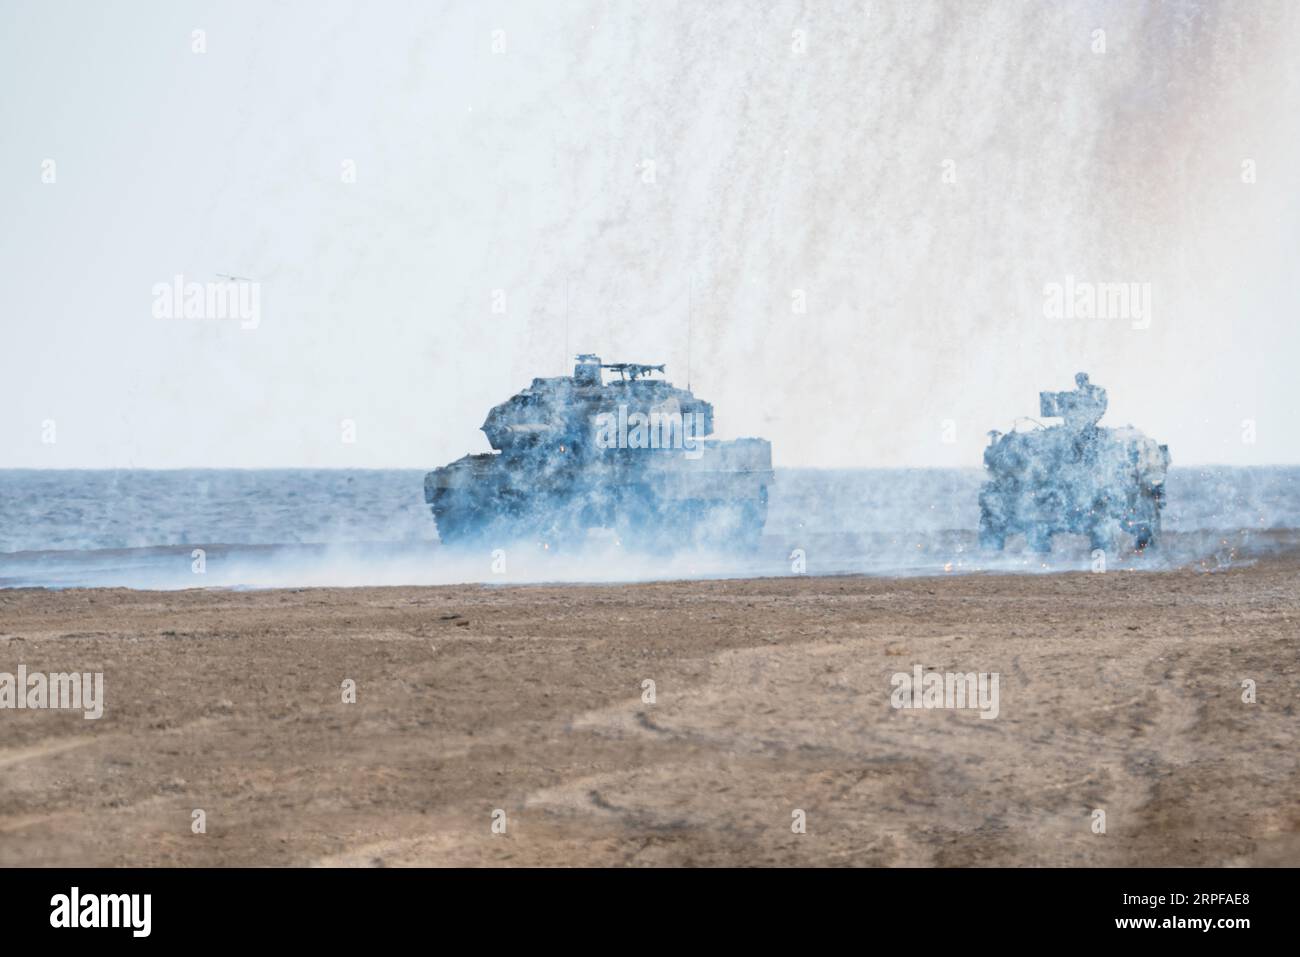 Battle tanks under a screen of smoke at the Armed Forces Day exhibition on Motril beach. Stock Photo